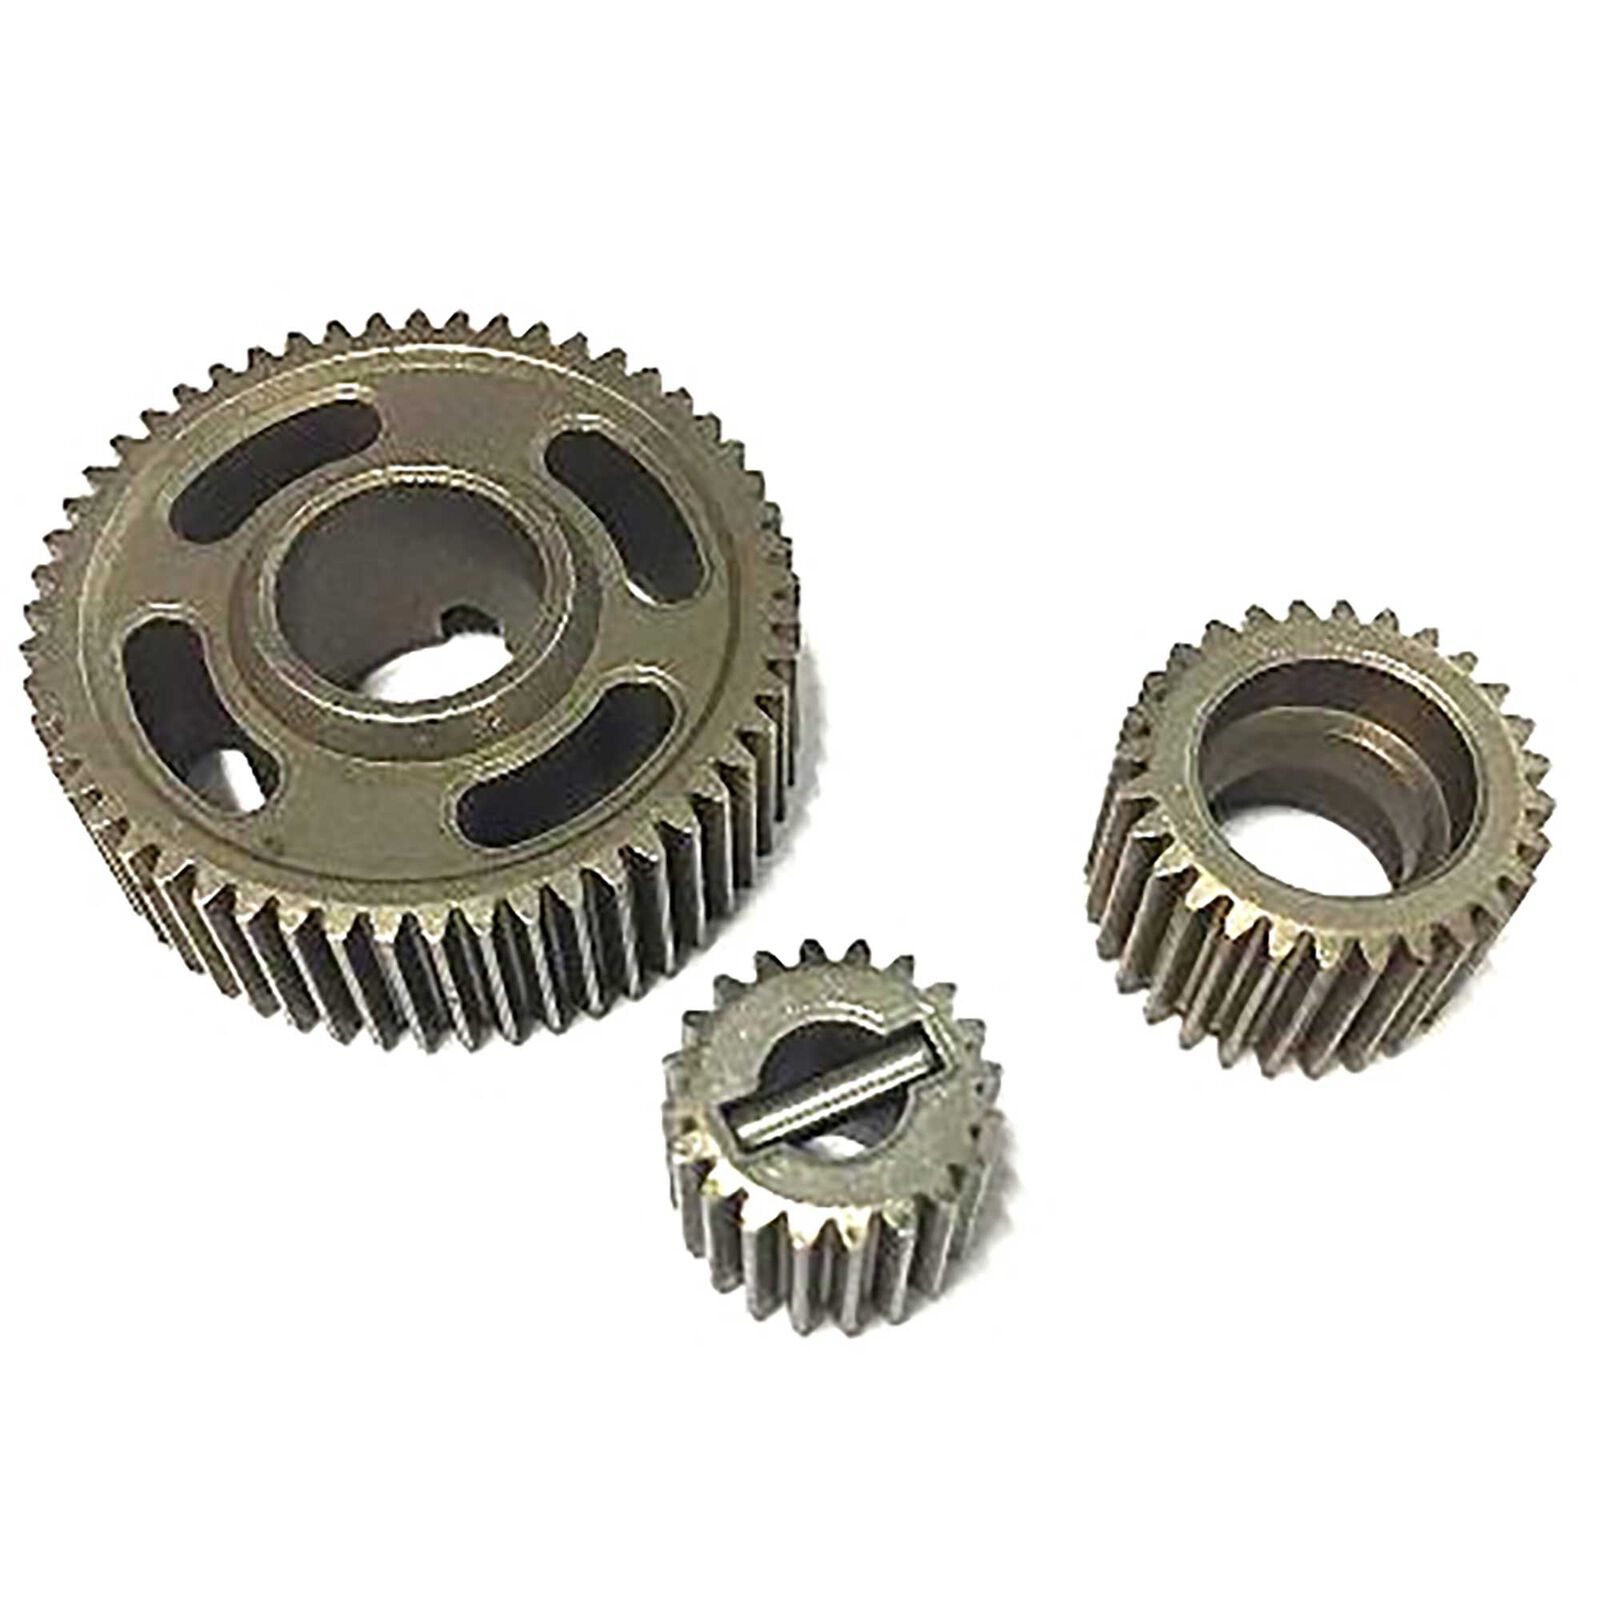 Steel trans gear set (20 28 53T) and pin Ever 7 10